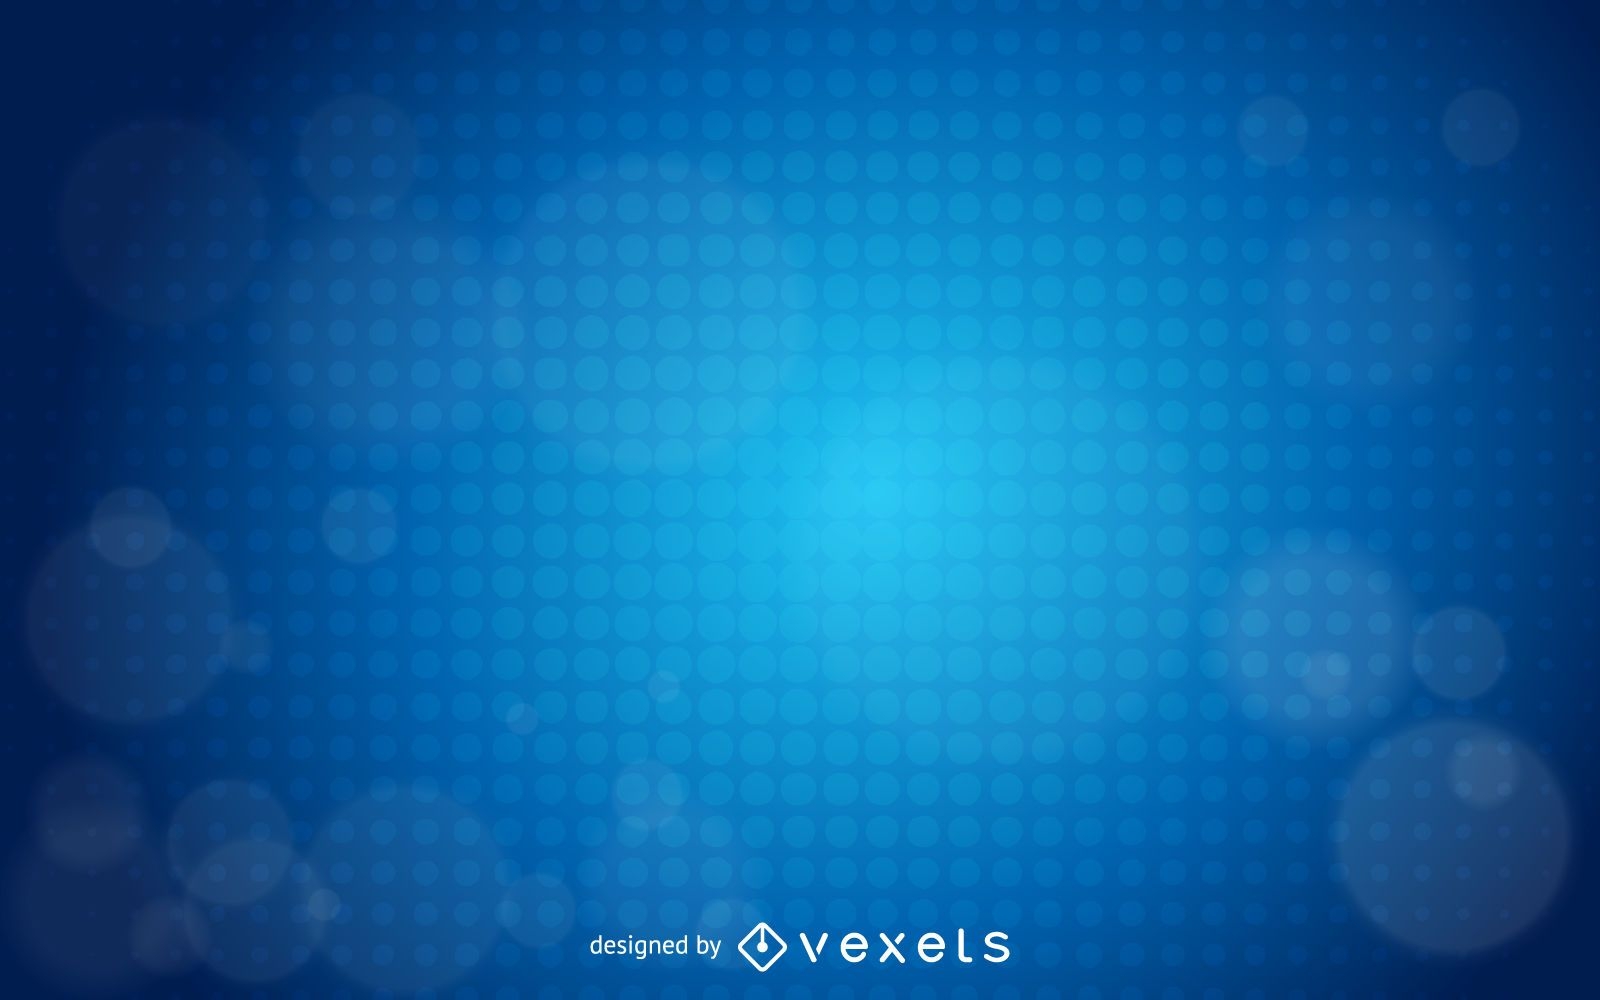 Blue Glowing Halftone Dot Business Background